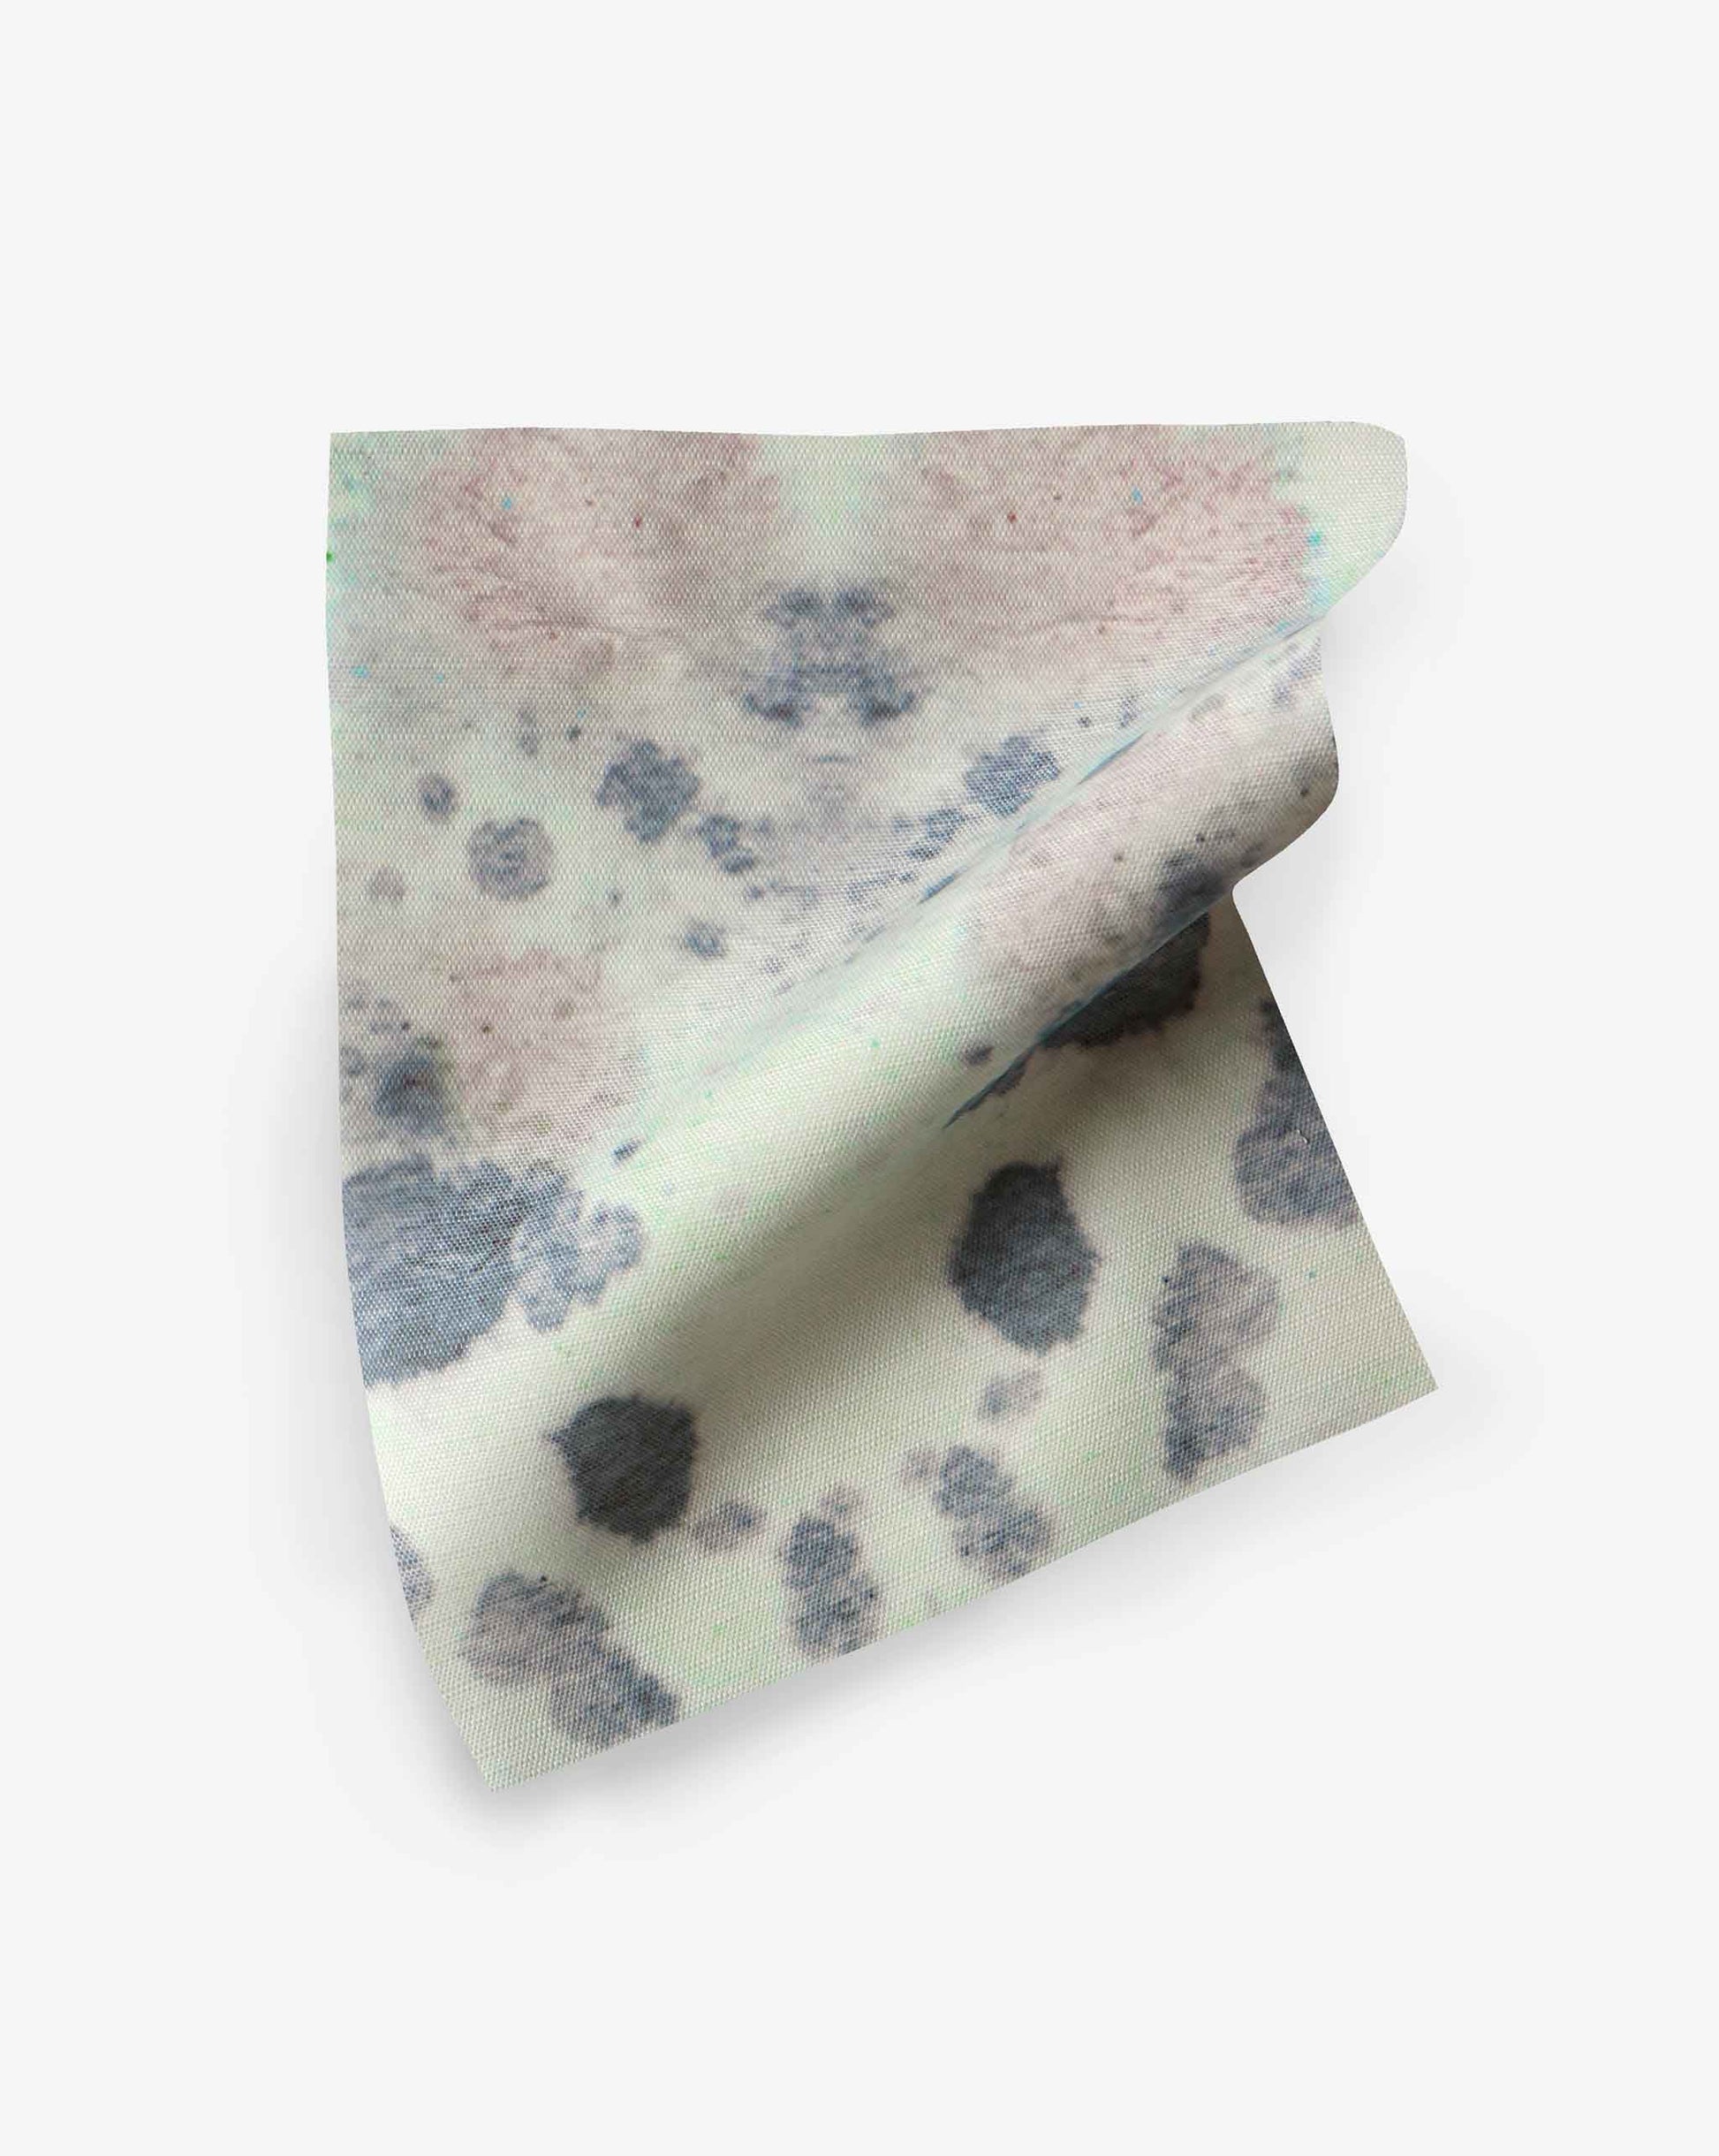 A piece of fabric with a tie-dye pattern in shades of pink, blue, and gray, displayed on a white background. Ideal for high-traffic applications, the Species Performance Fabric||Hide resists ink bleed while maintaining its vibrant colors.